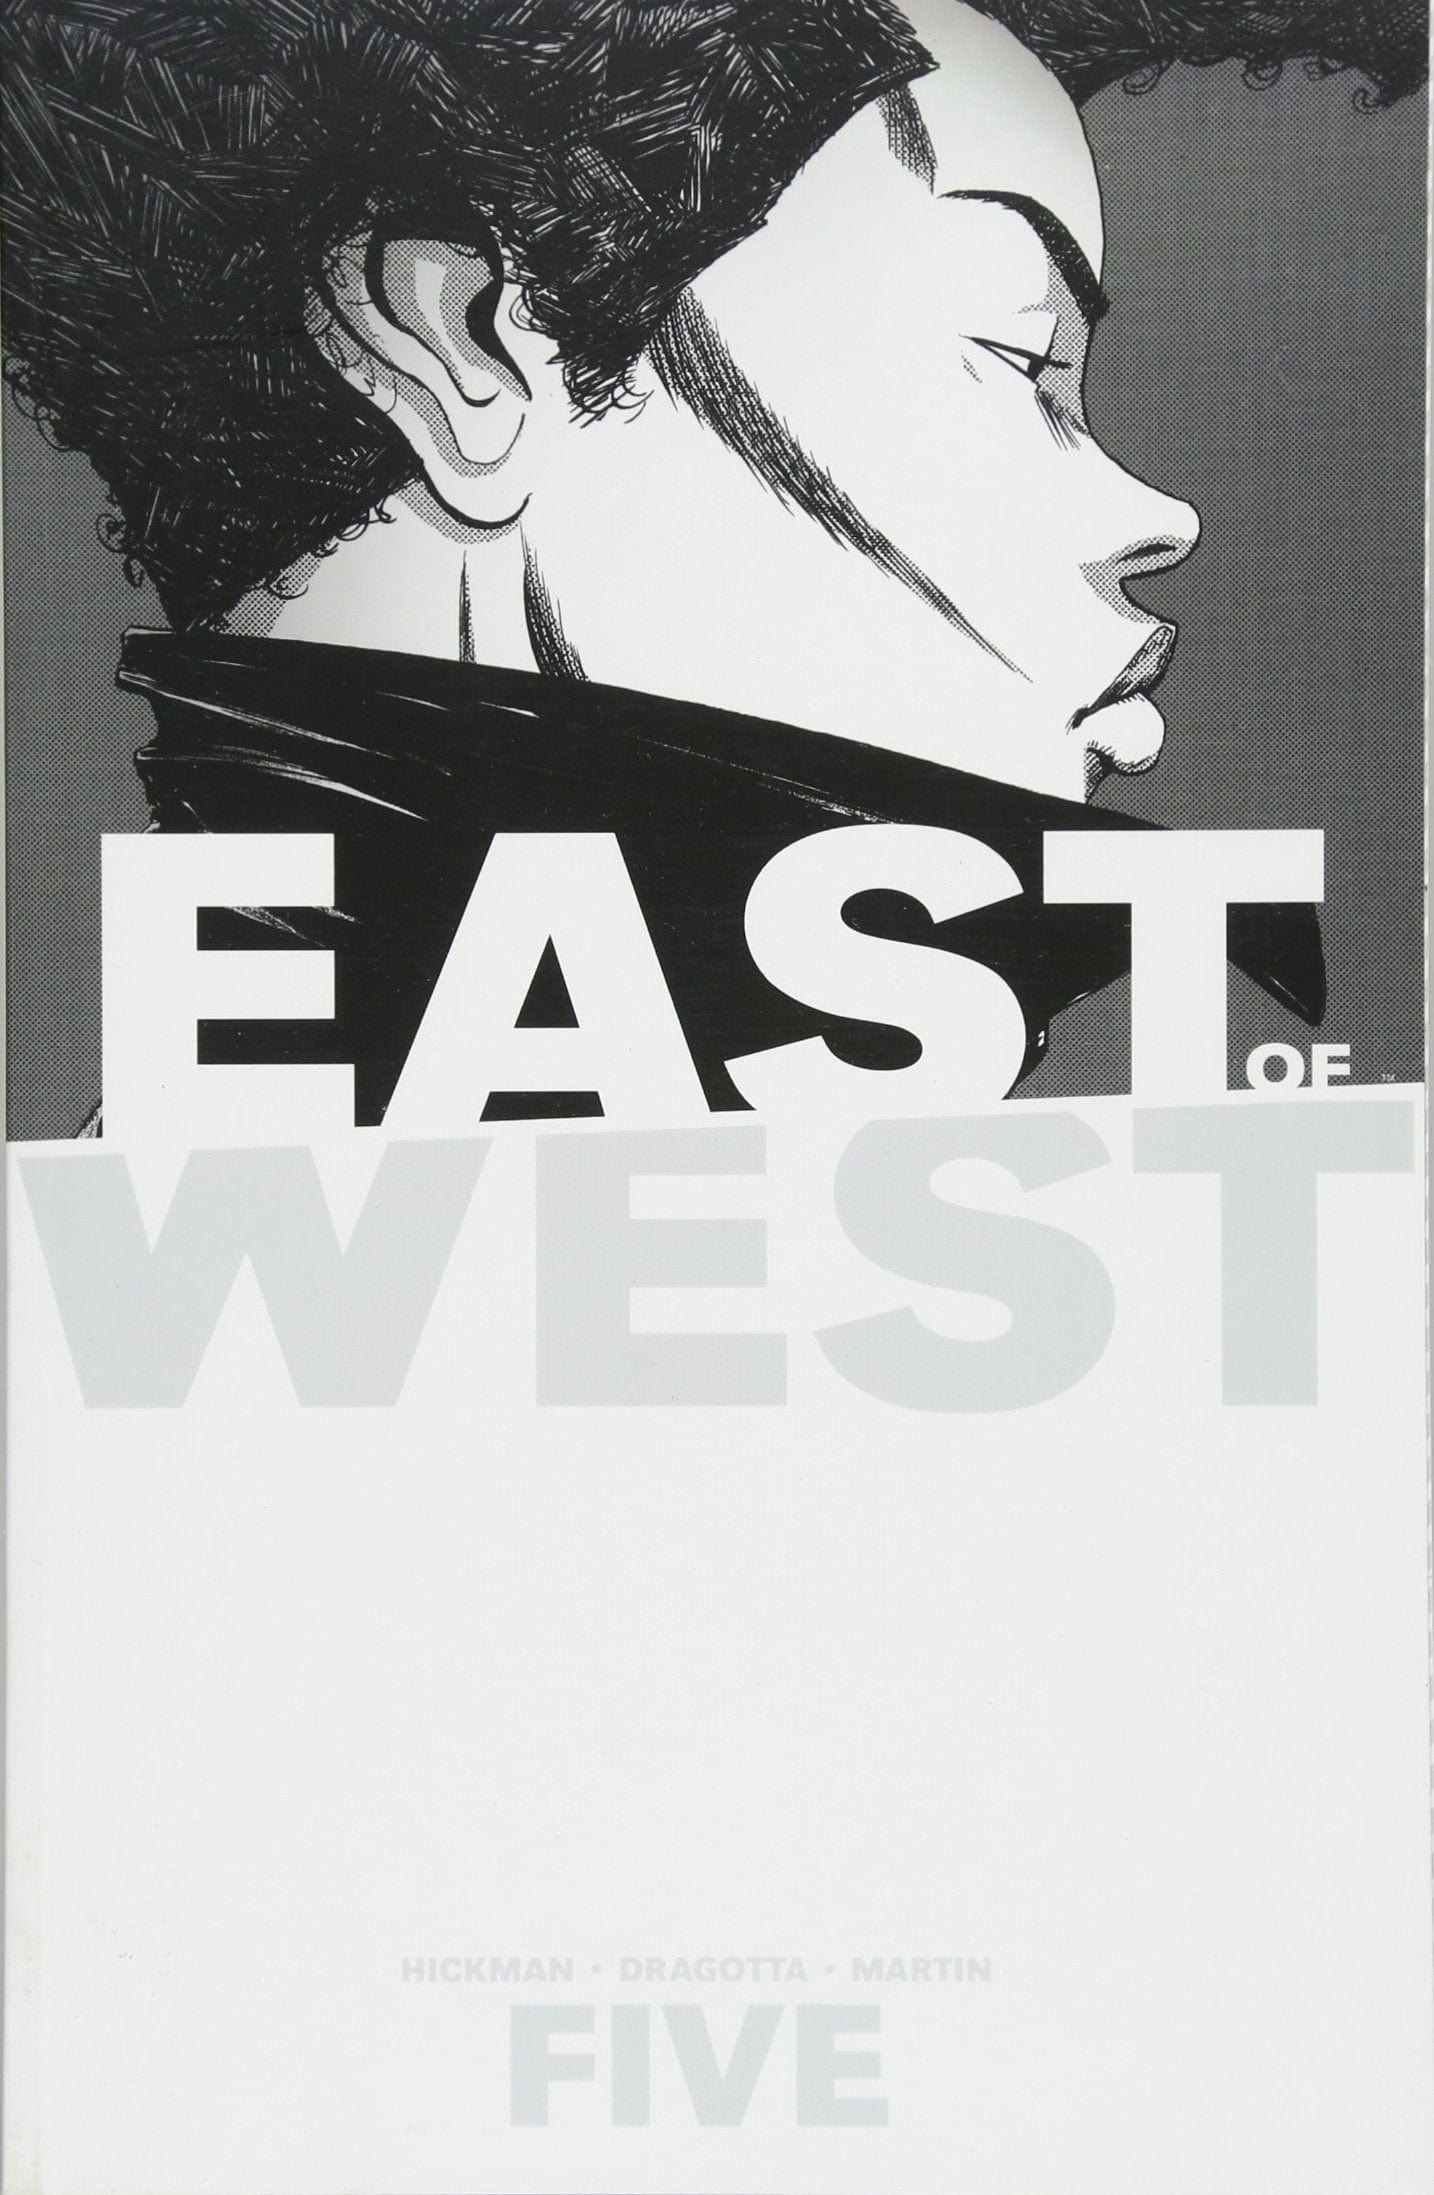 East of West Vol. 5: All These Secrets TP - Third Eye